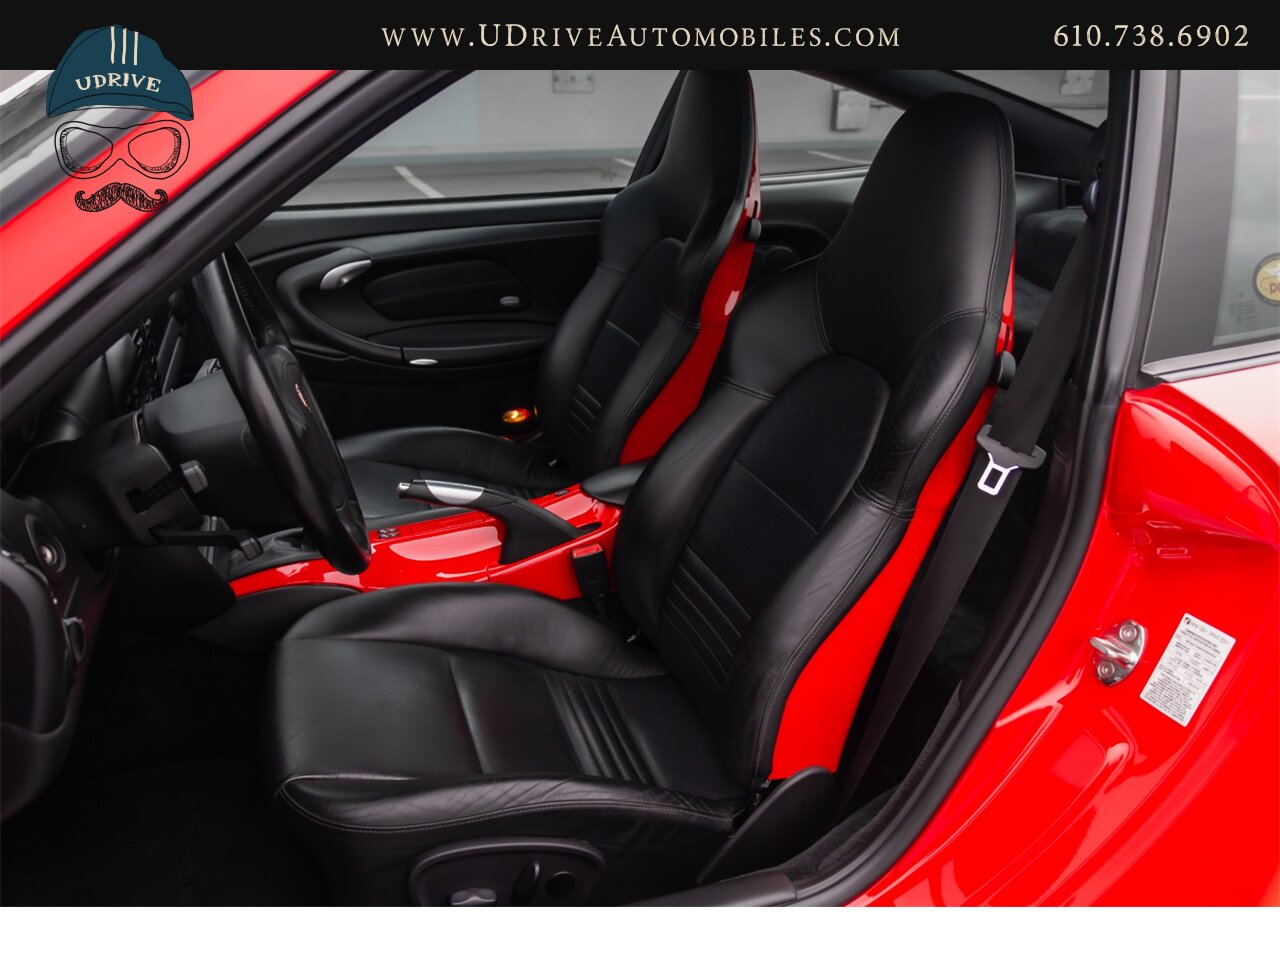 2004 Porsche 911 996 GT3 Guards Red Sport Seats Painted Hardbacks  Painted Center Console 18k Miles - Photo 30 - West Chester, PA 19382